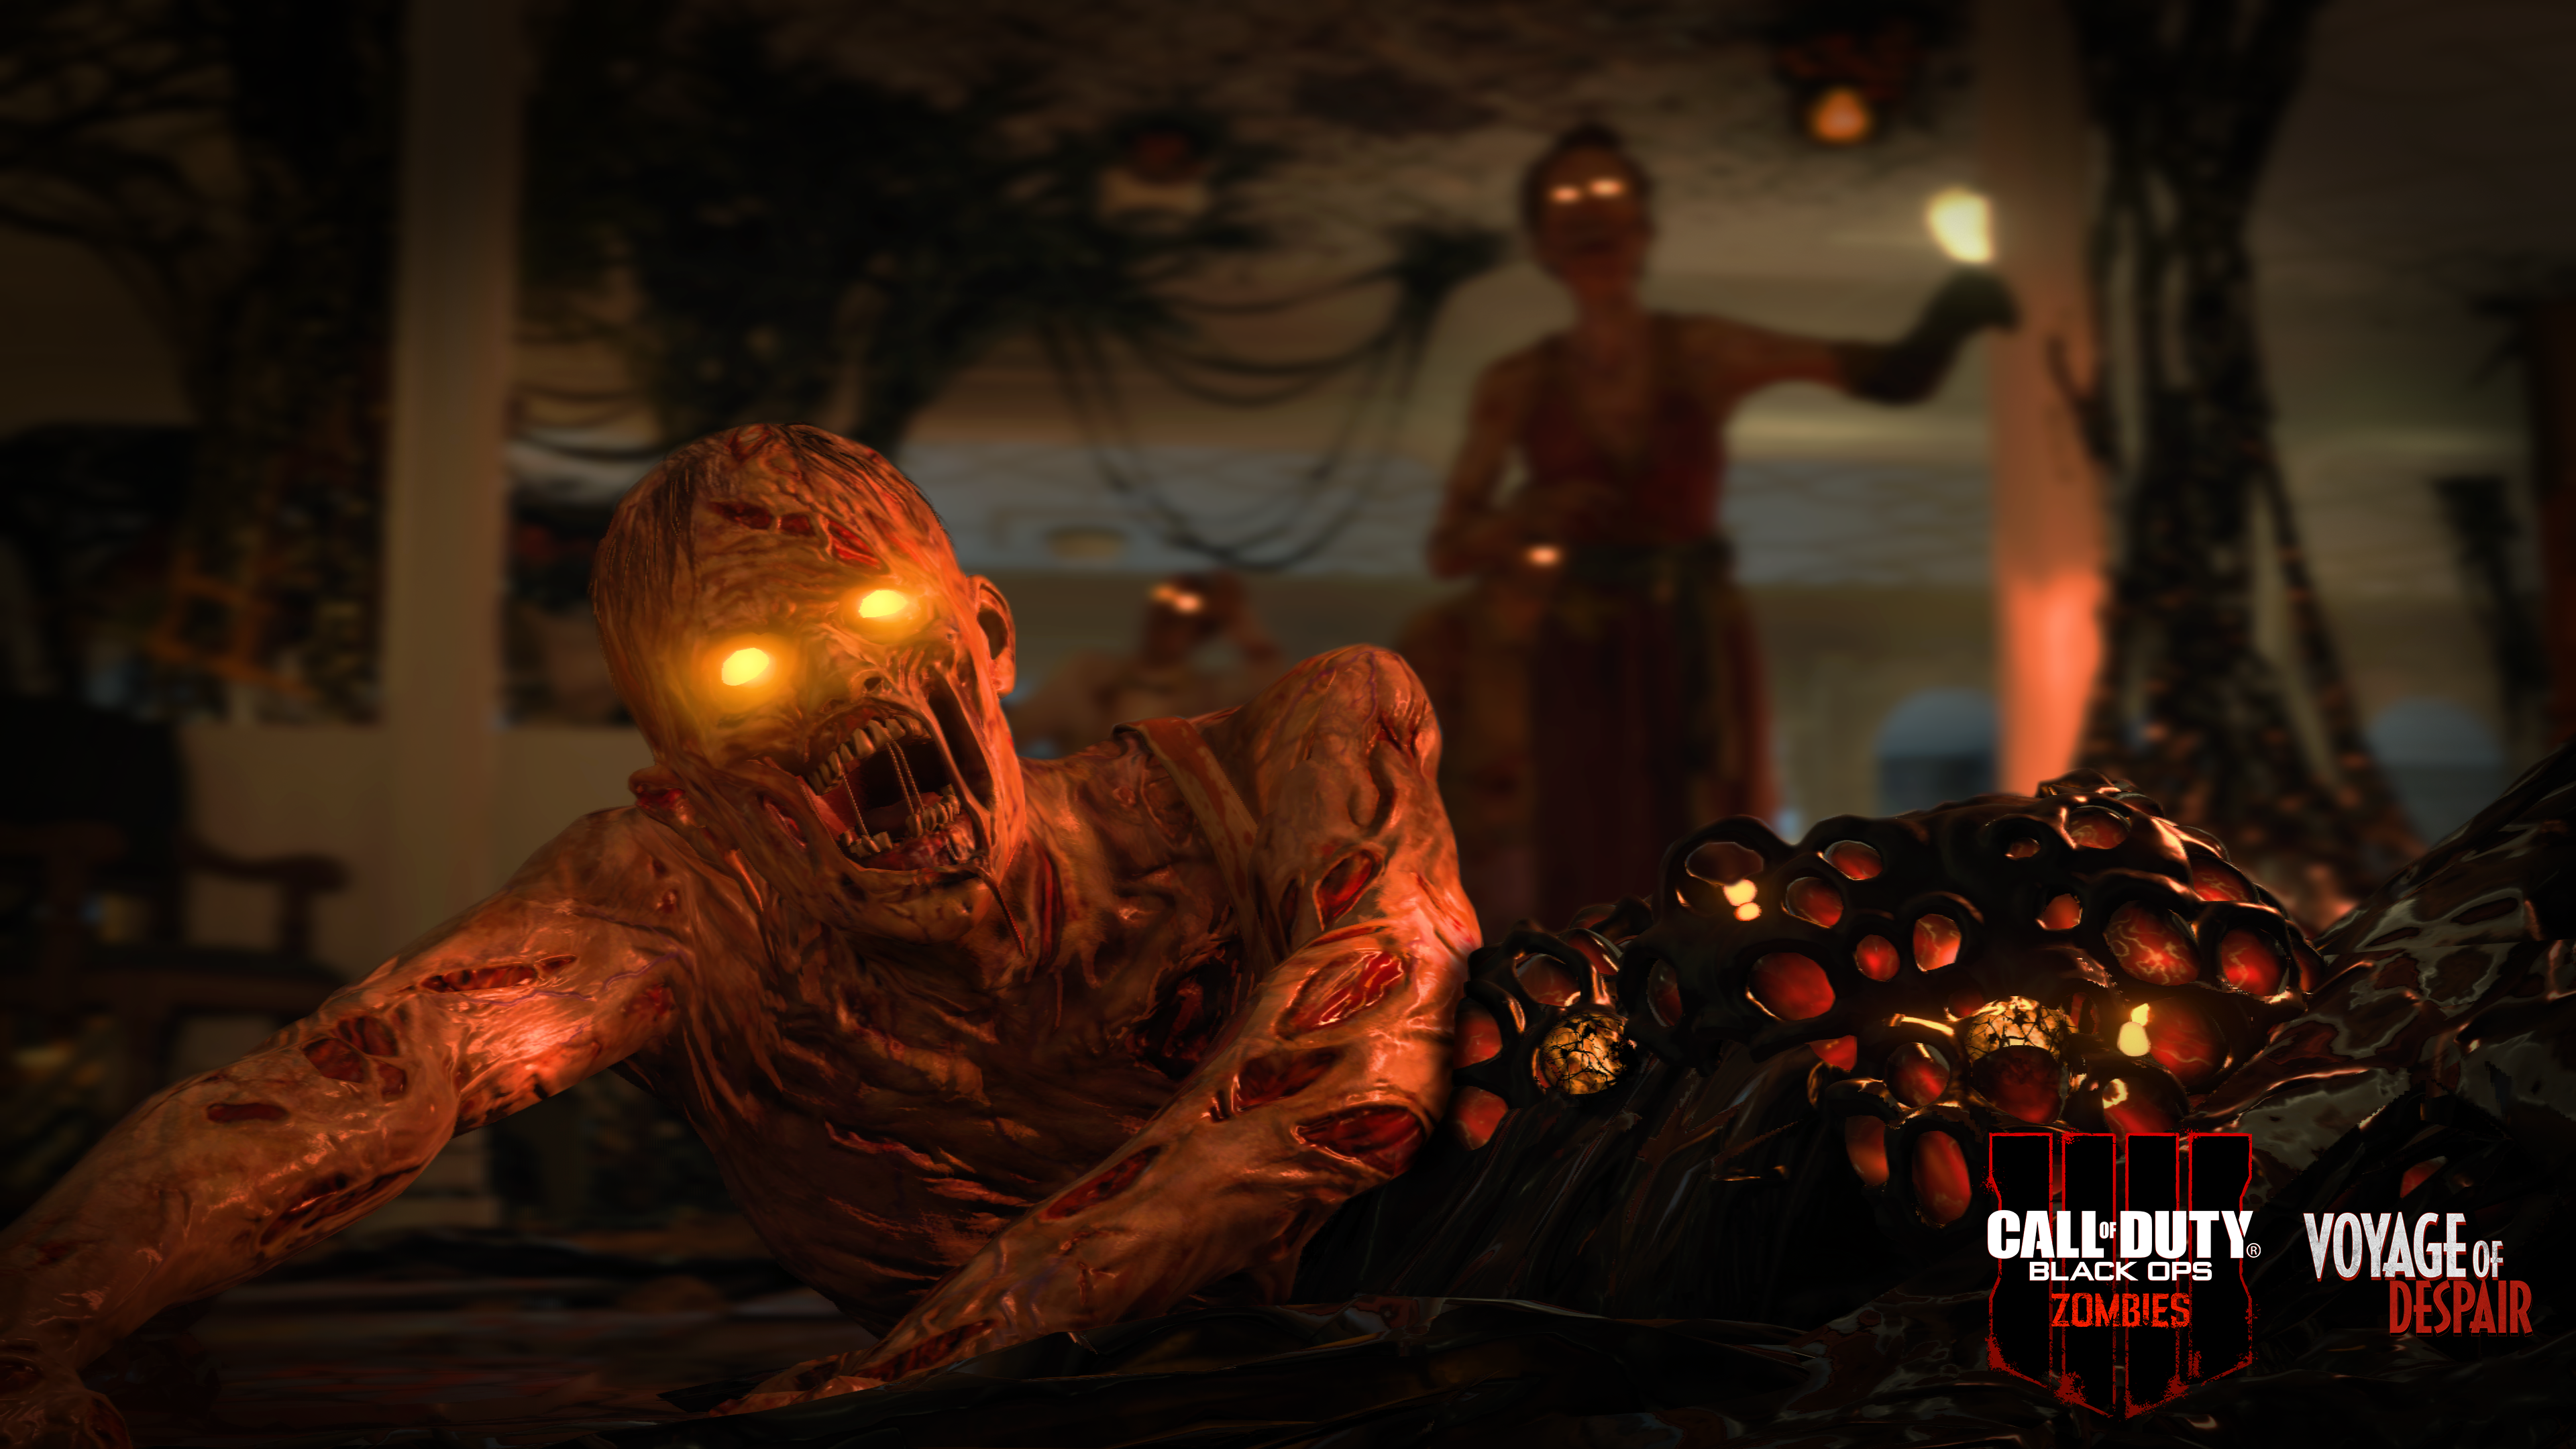 Call Of Duty: Black Ops 4 Zombies screencap (Activision/Treyarch)